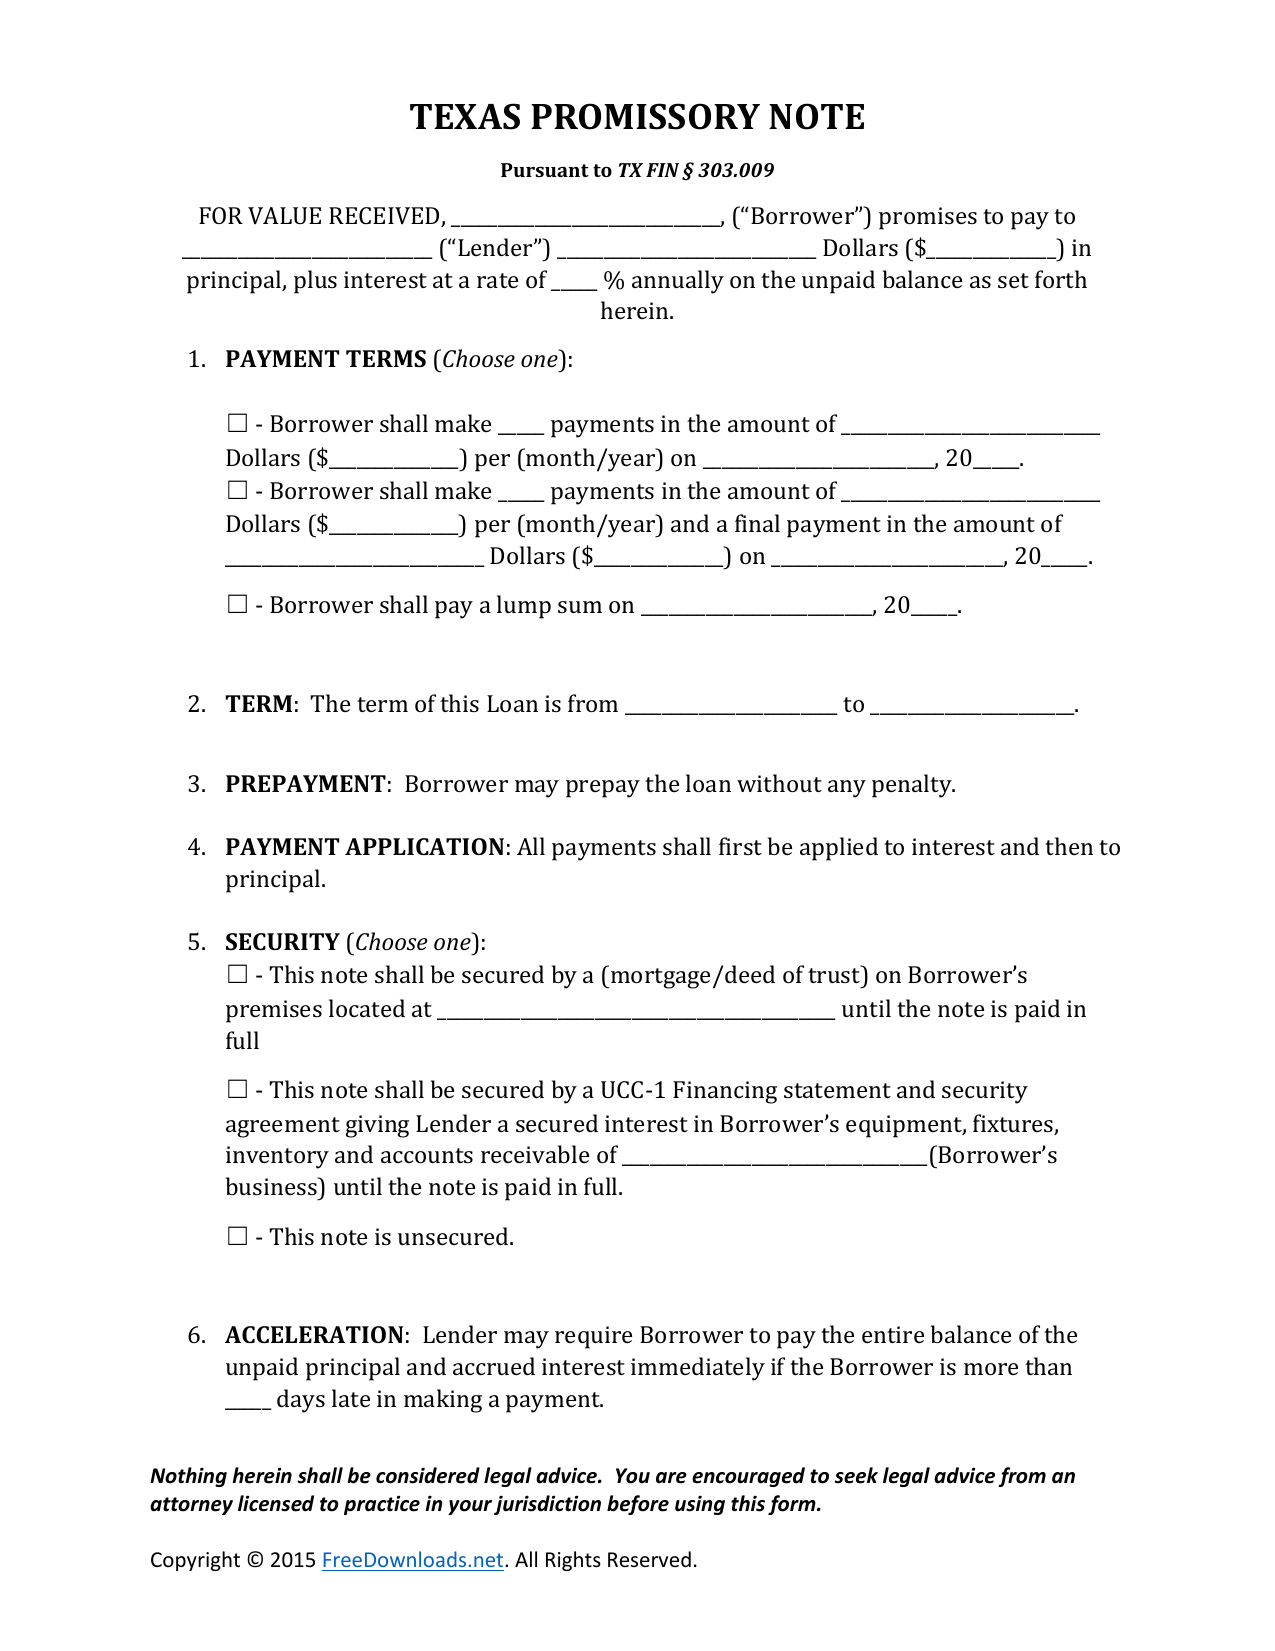 texas promissory note template